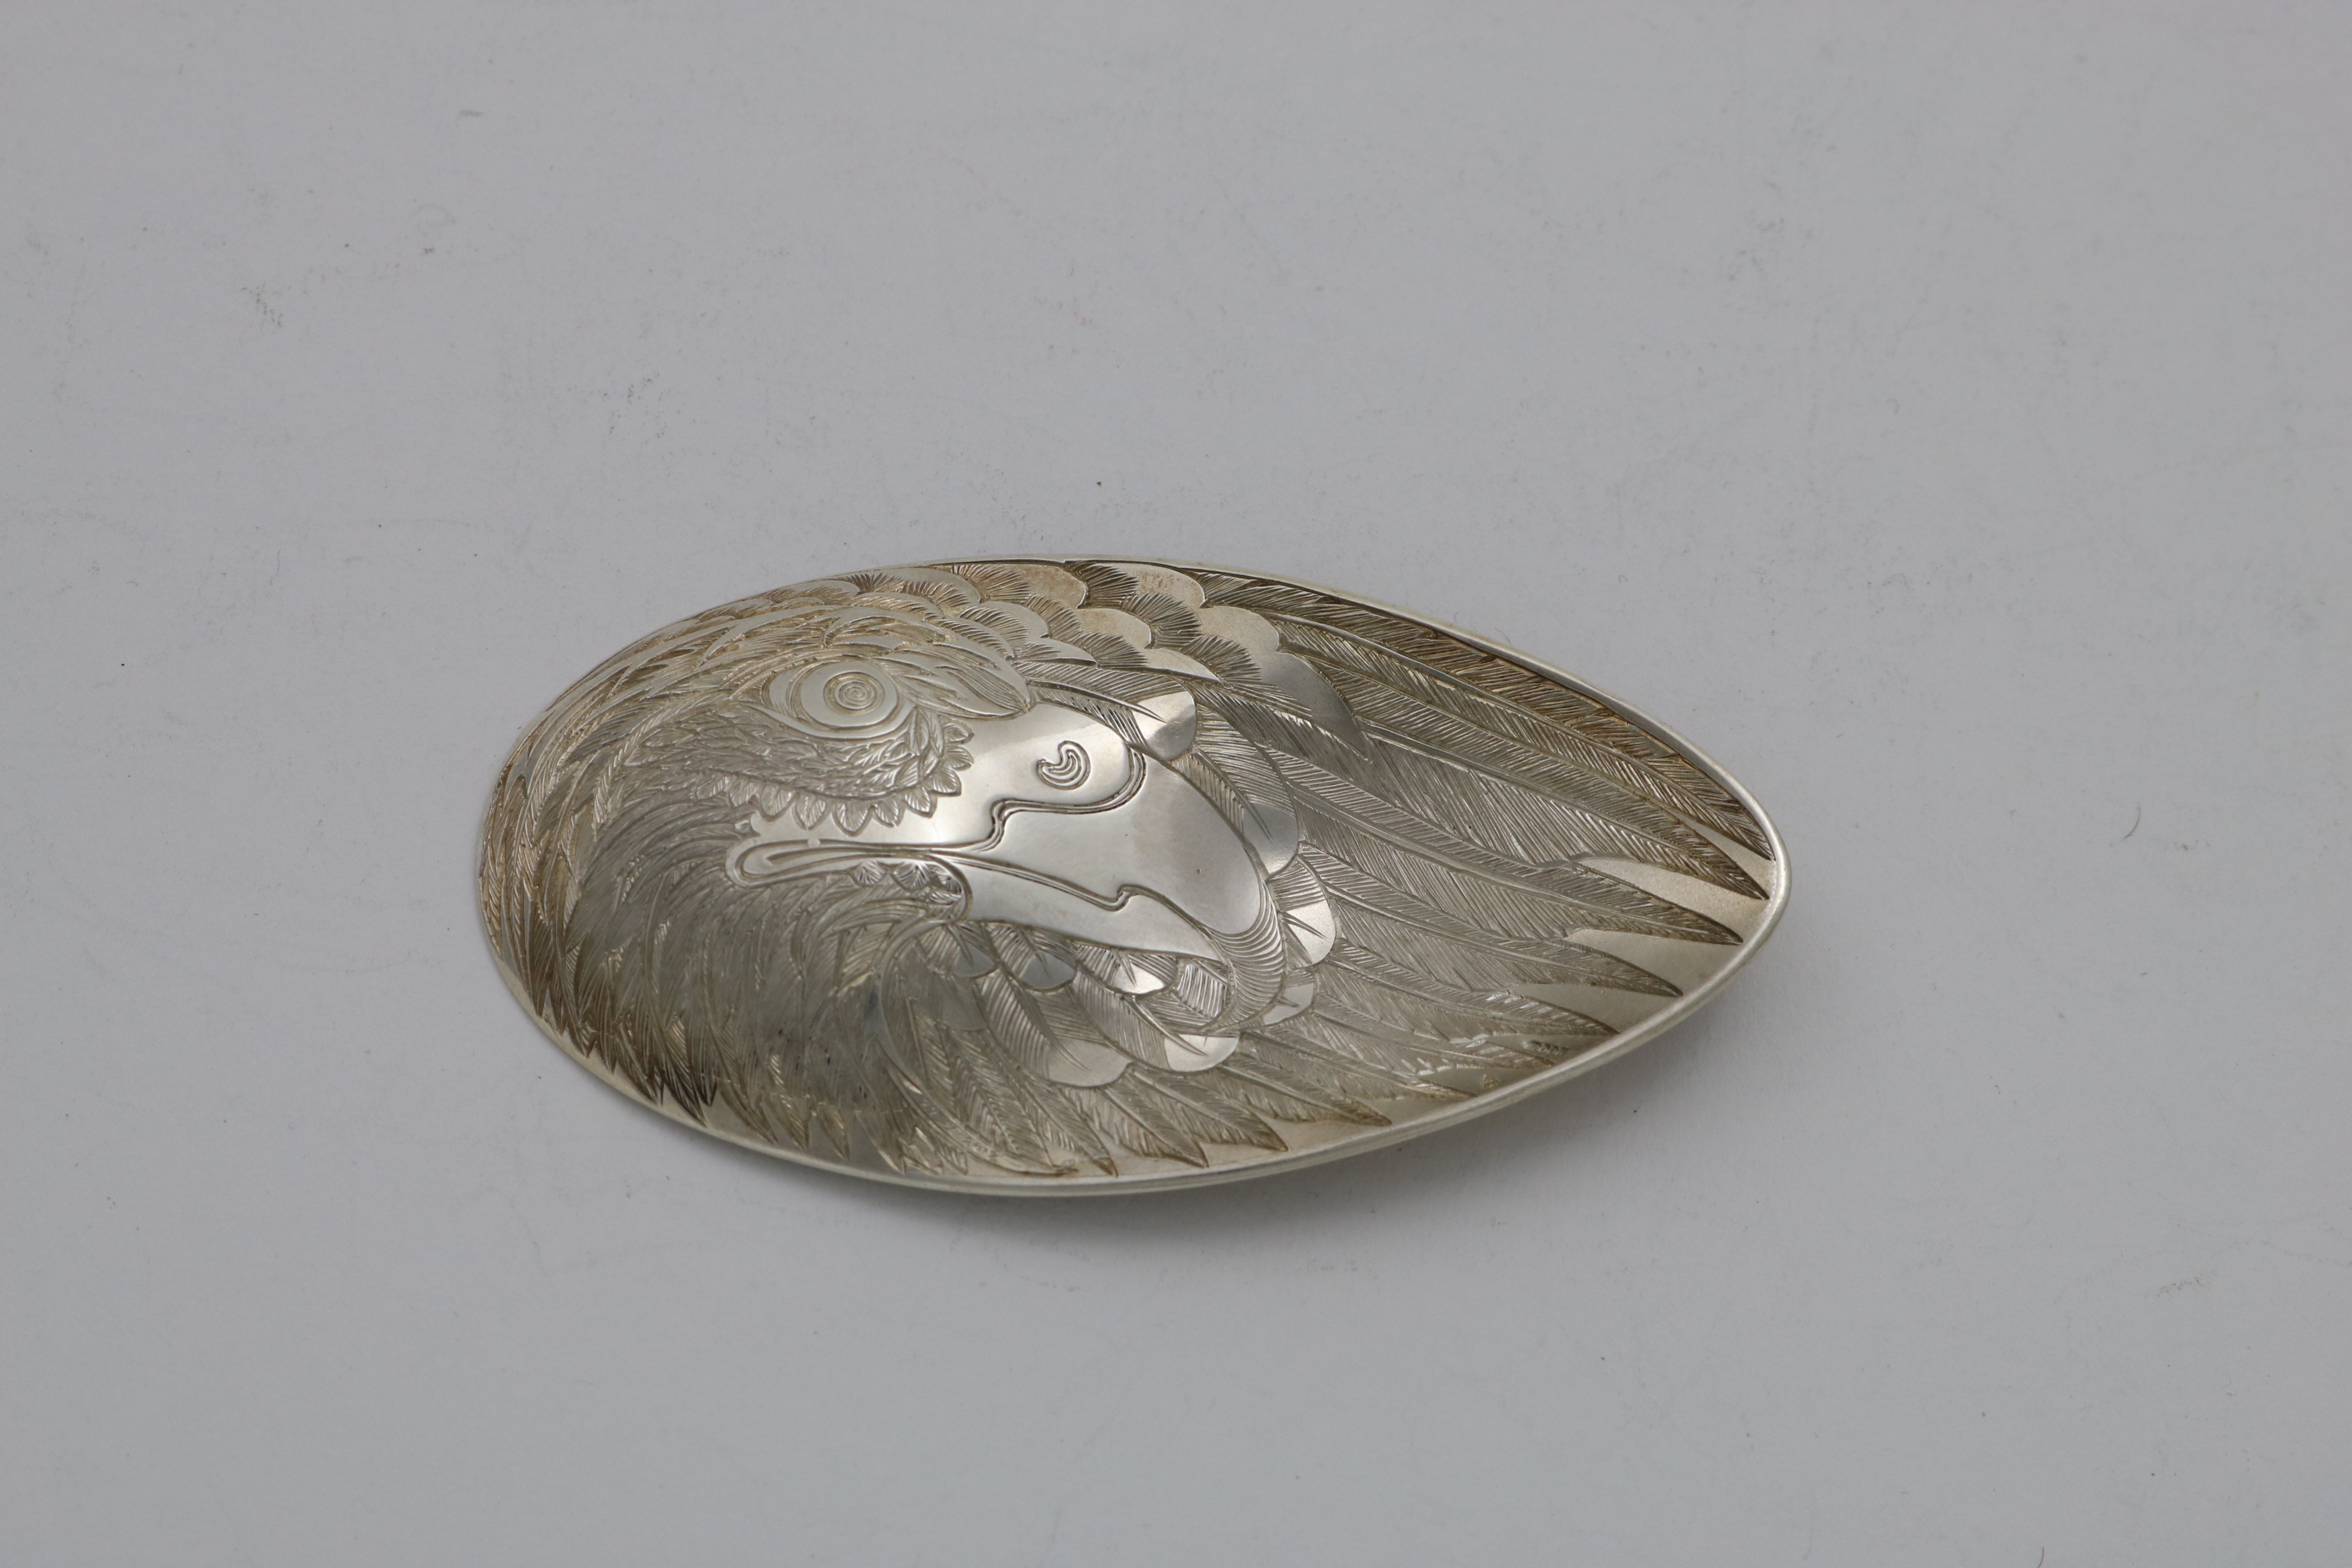 A CONTEMPORARY DOUBLE-SIDED CADDY SPOON engraved to resemble a stylised eagle's wing form made by